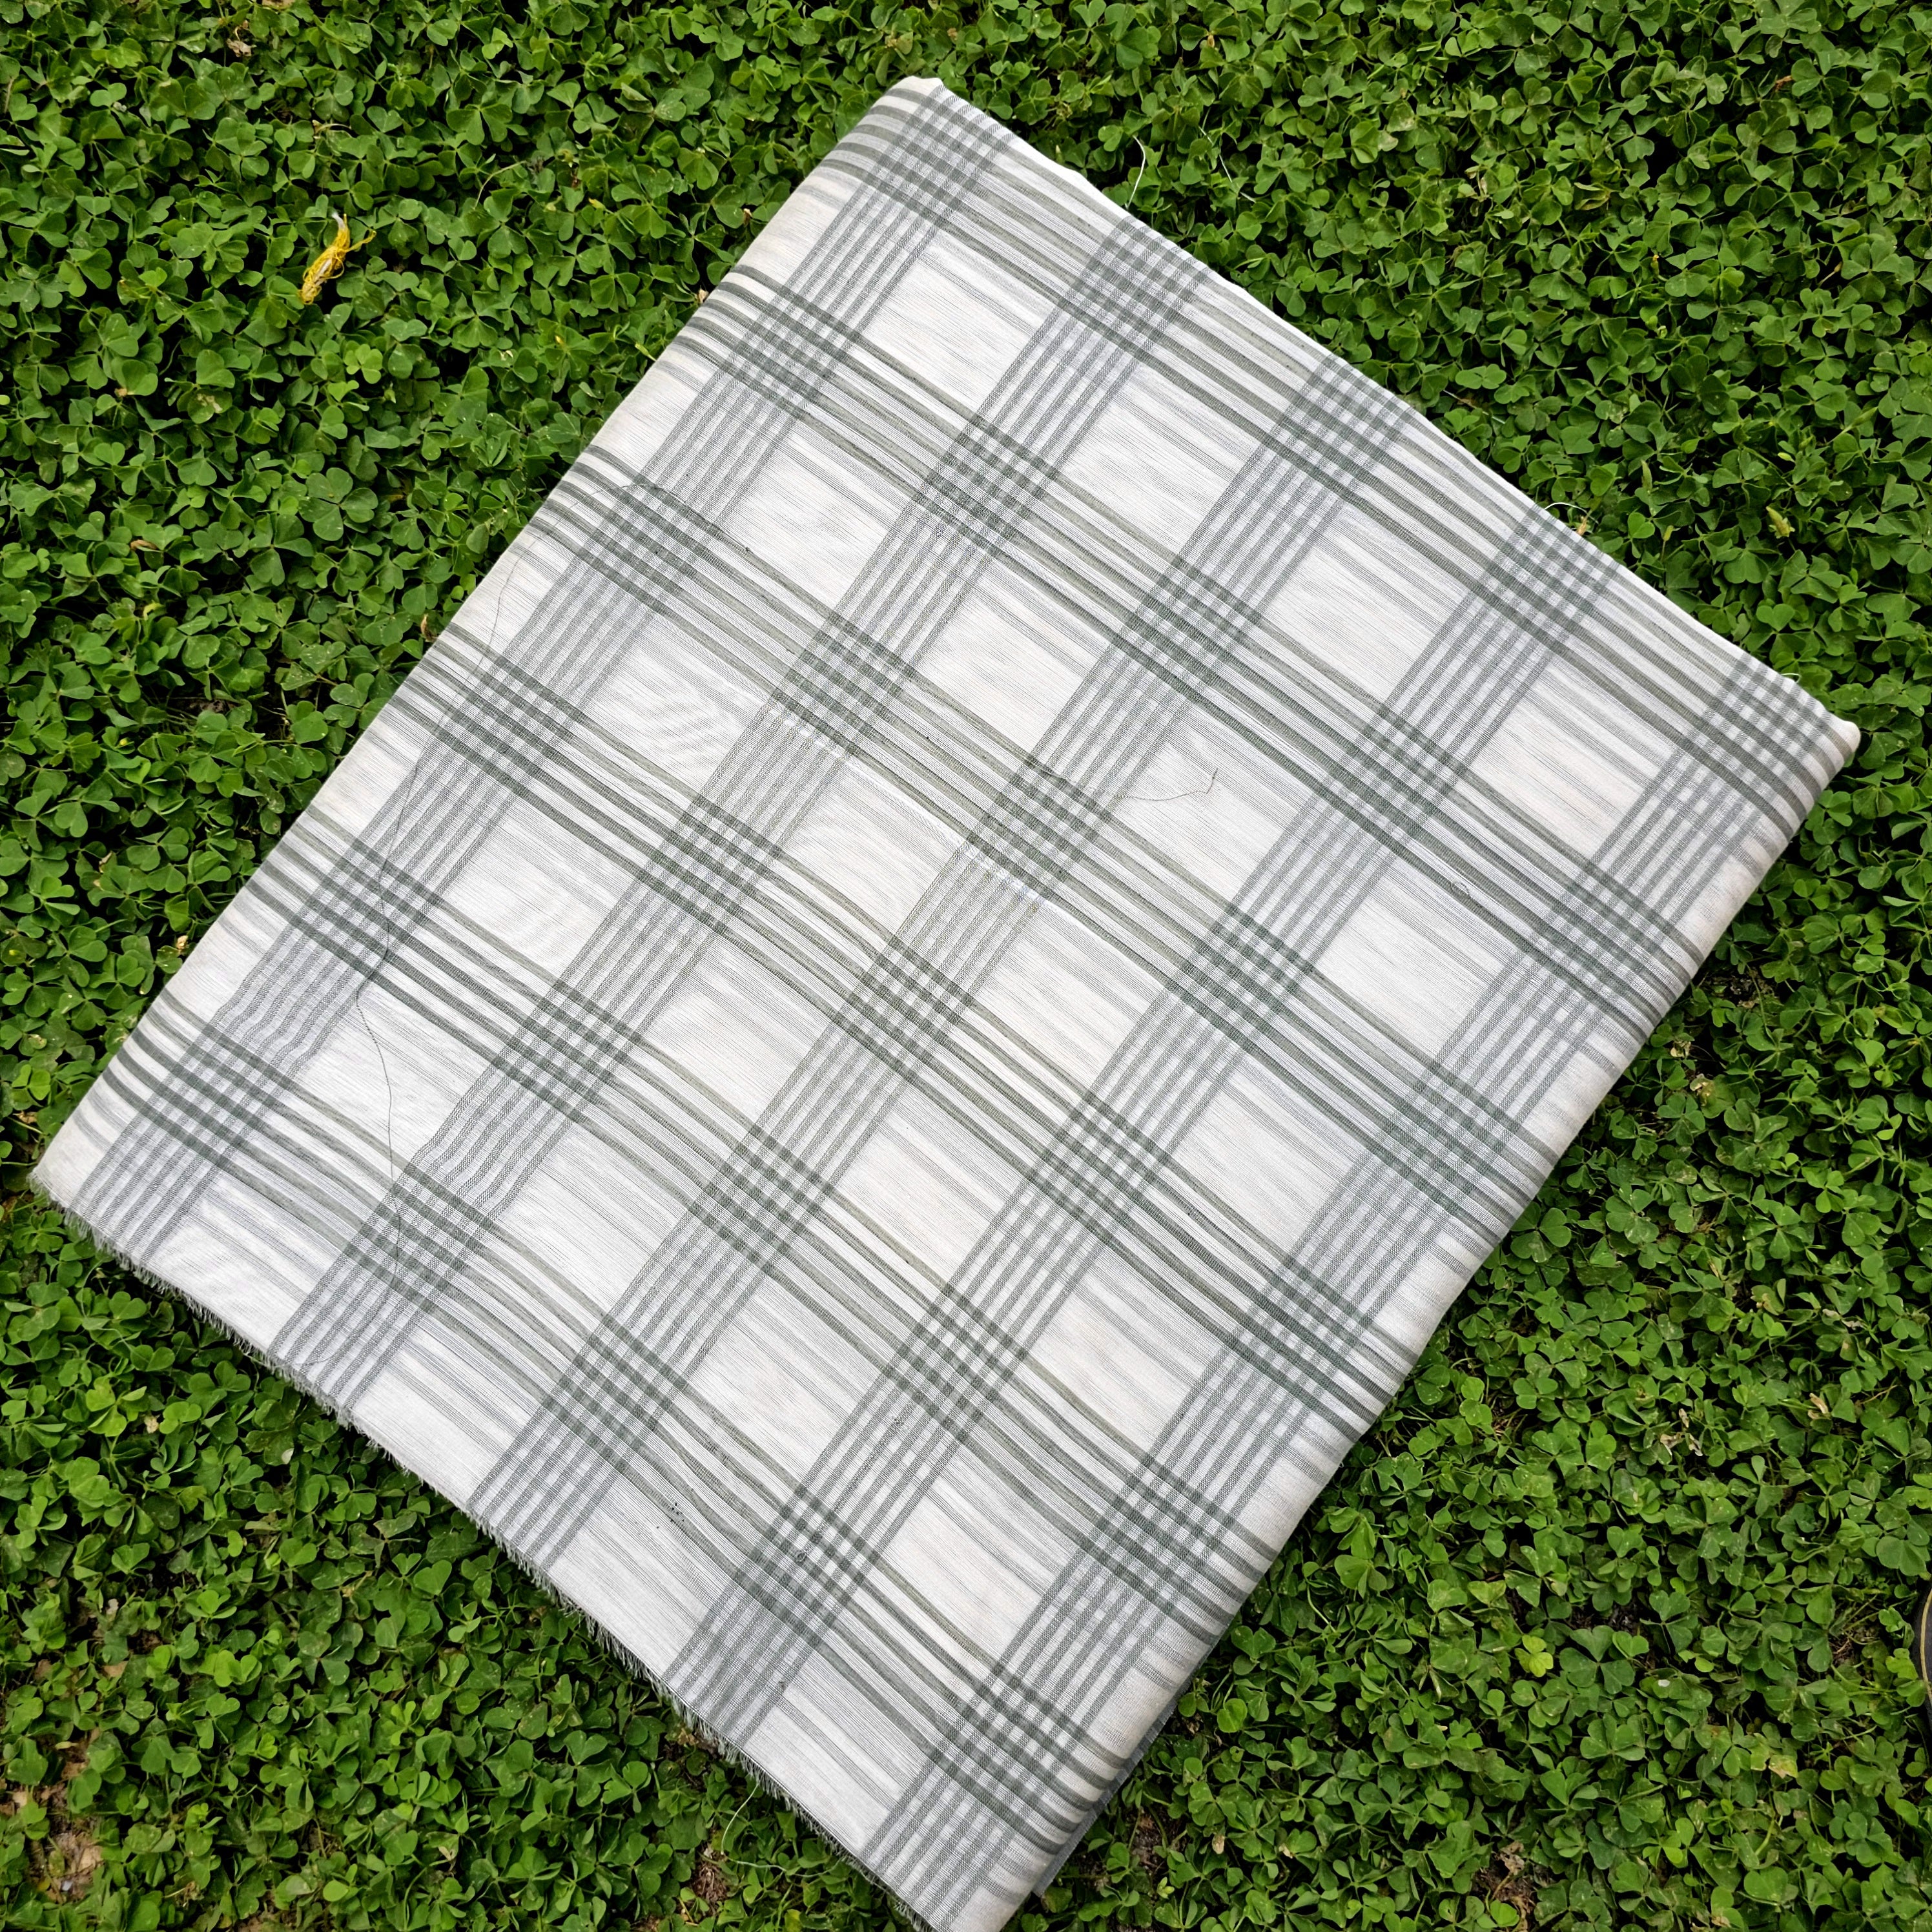 Fabric with Checks of Military Green and Off White.